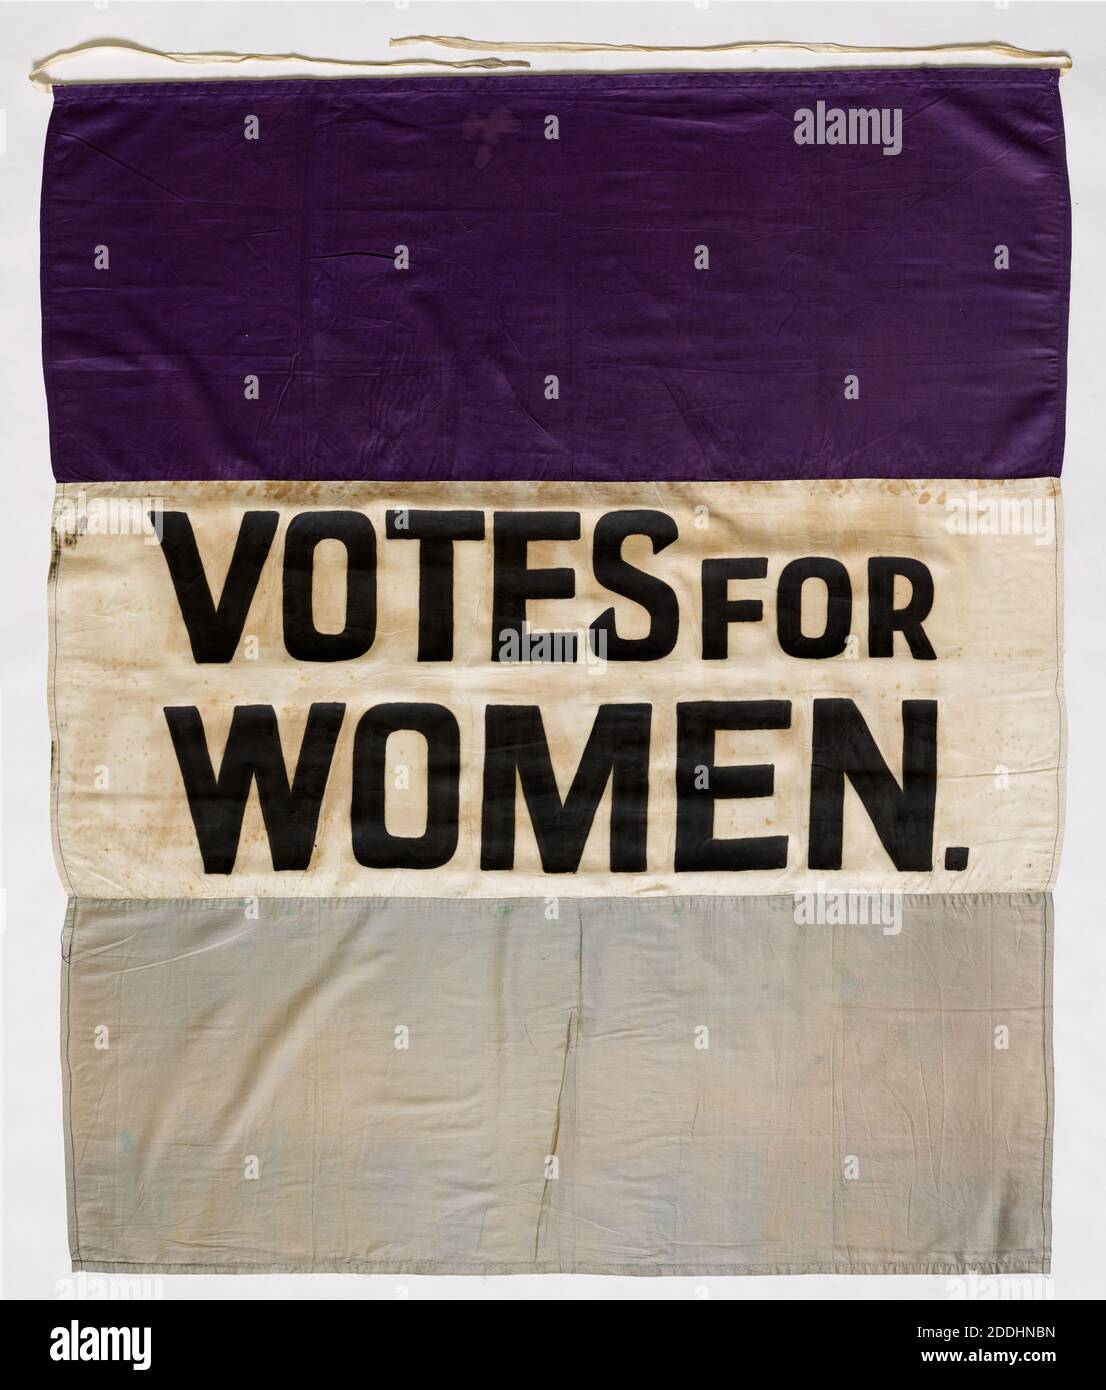 Suffragette Banner, votes for Women, 1910-1920, 20th Century, Textiles, England, Social history, Women's suffragage, Birmingham history Foto Stock